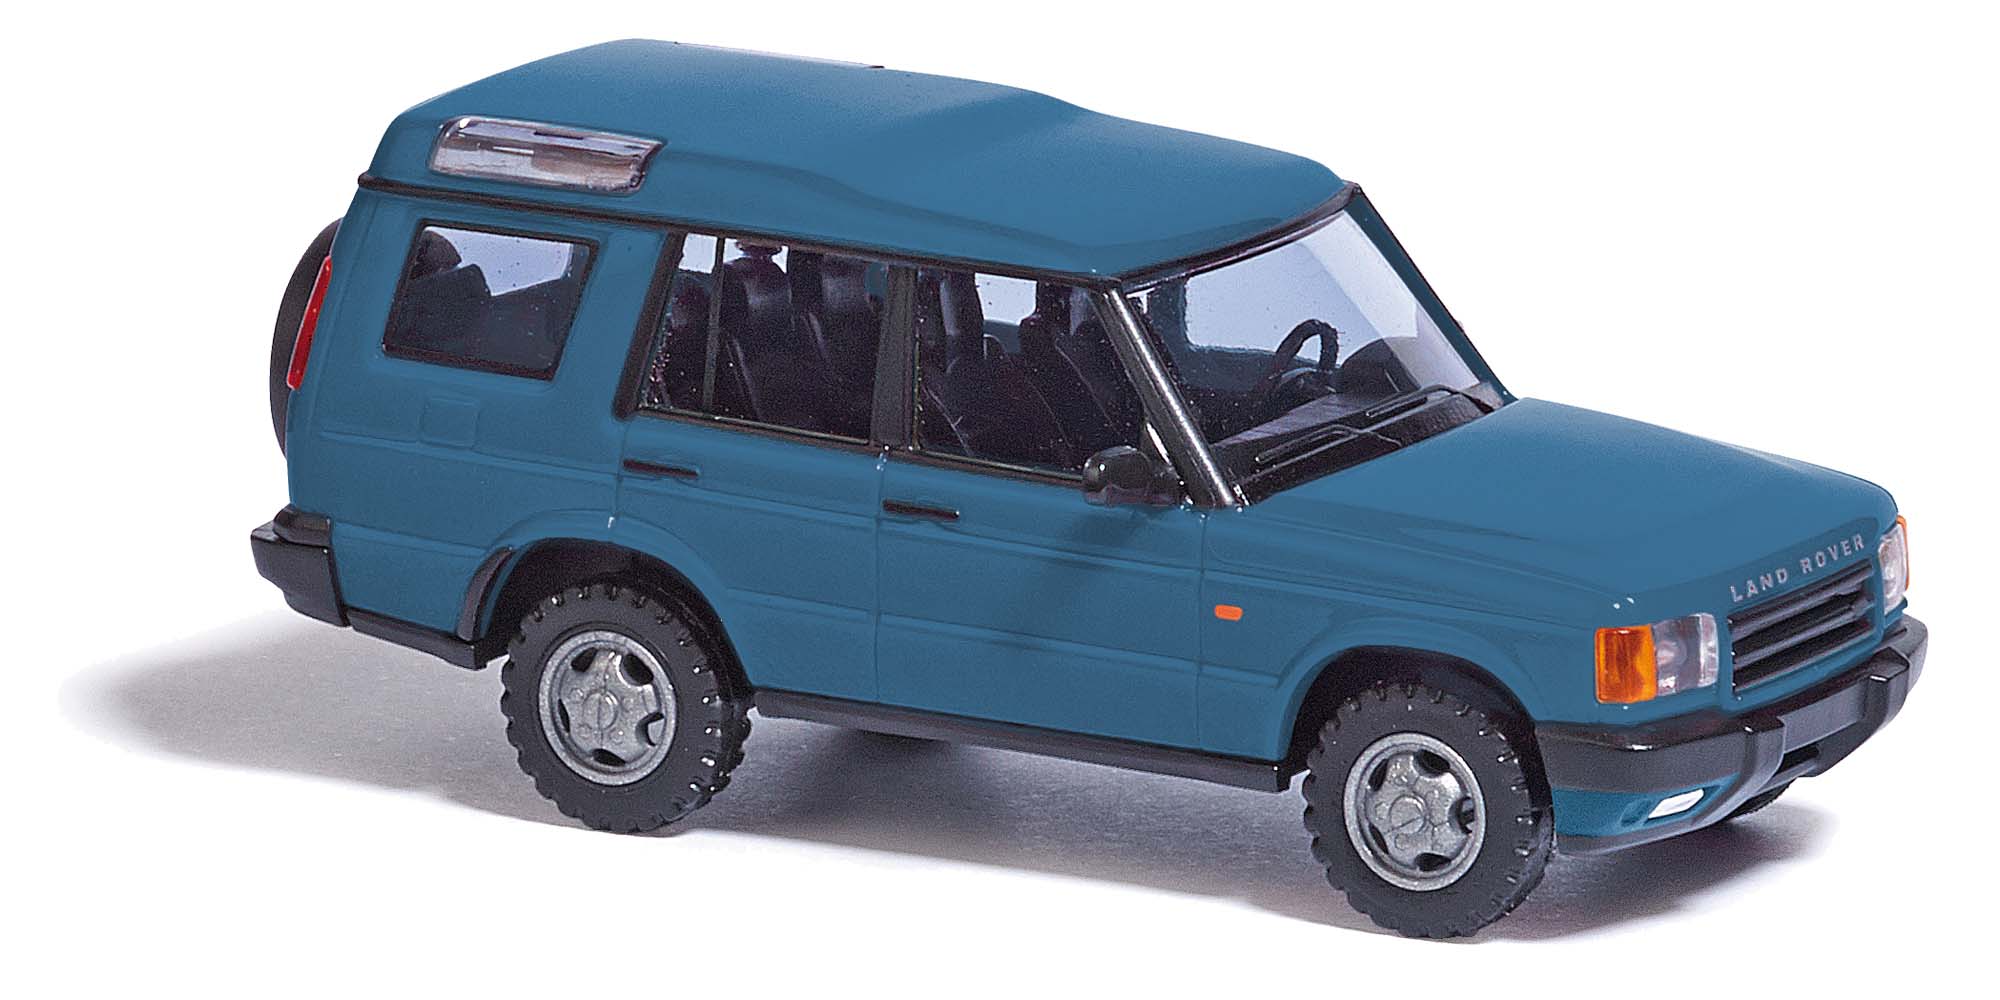 51904-Land Rover Discovery, Blau-4001738519044